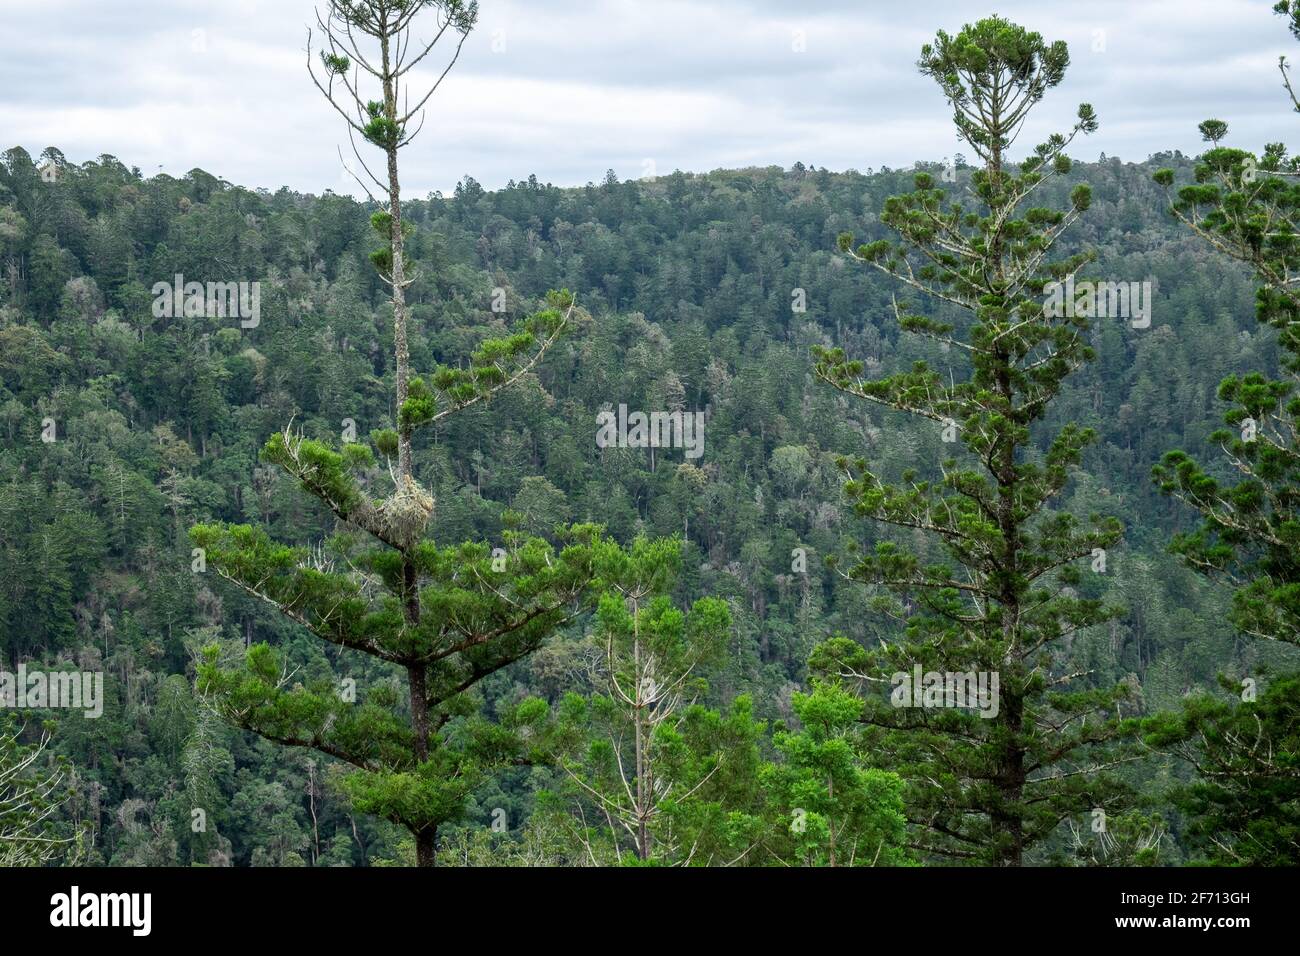 Foreground and Background of pines. Stock Photo